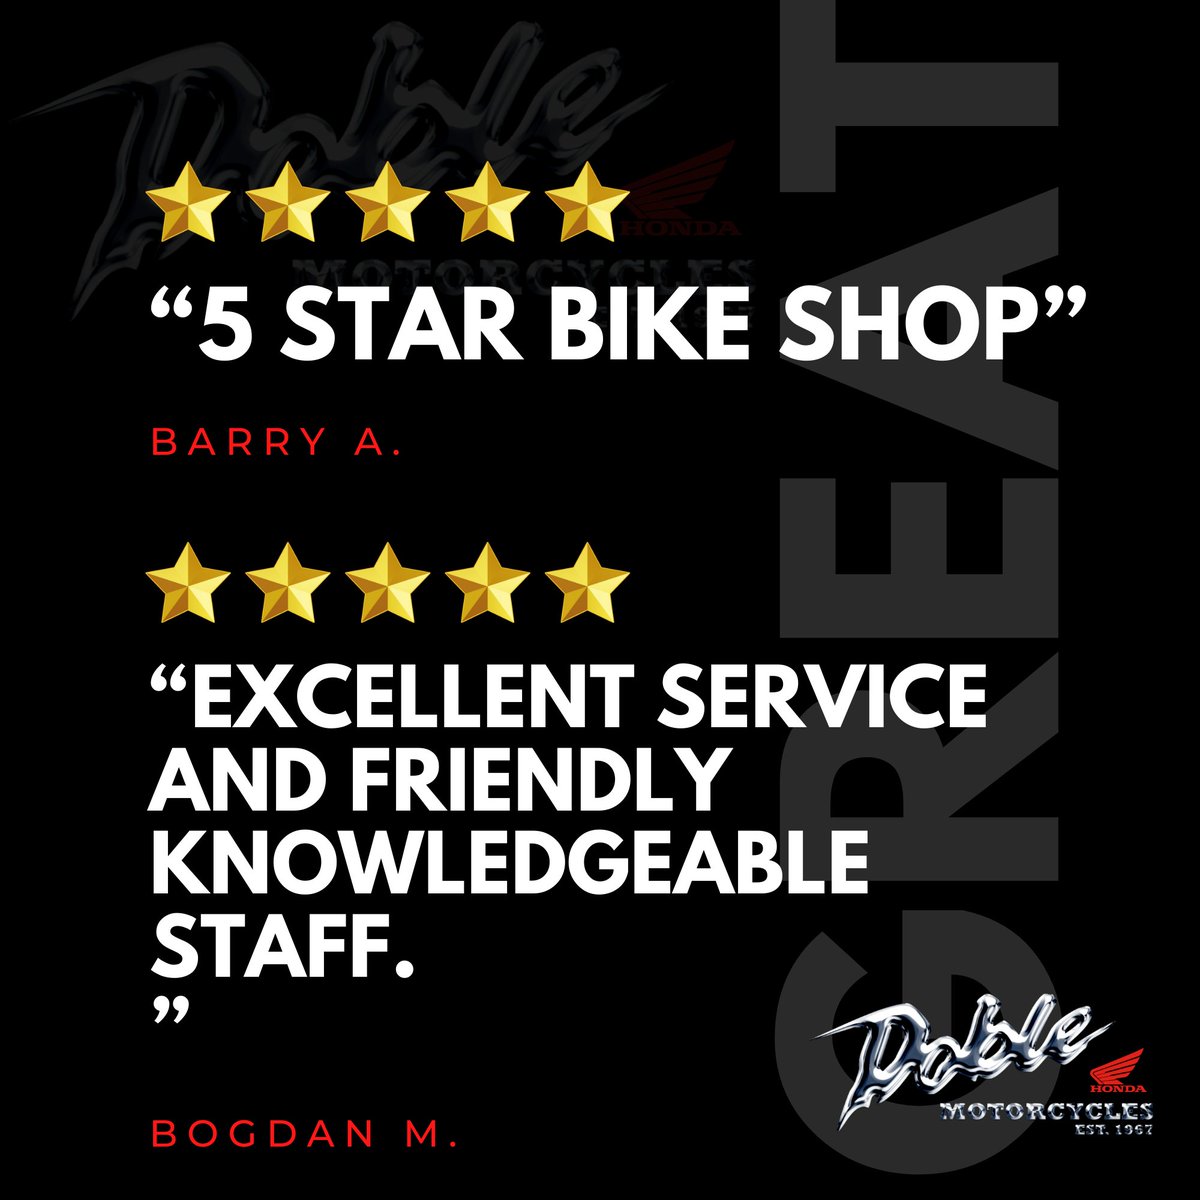 We're always delighted to hear when we've done a great job and will always listen when we hear ways we can improve. Review us at tinyurl.com/ReviewDobles #WeAreBikers